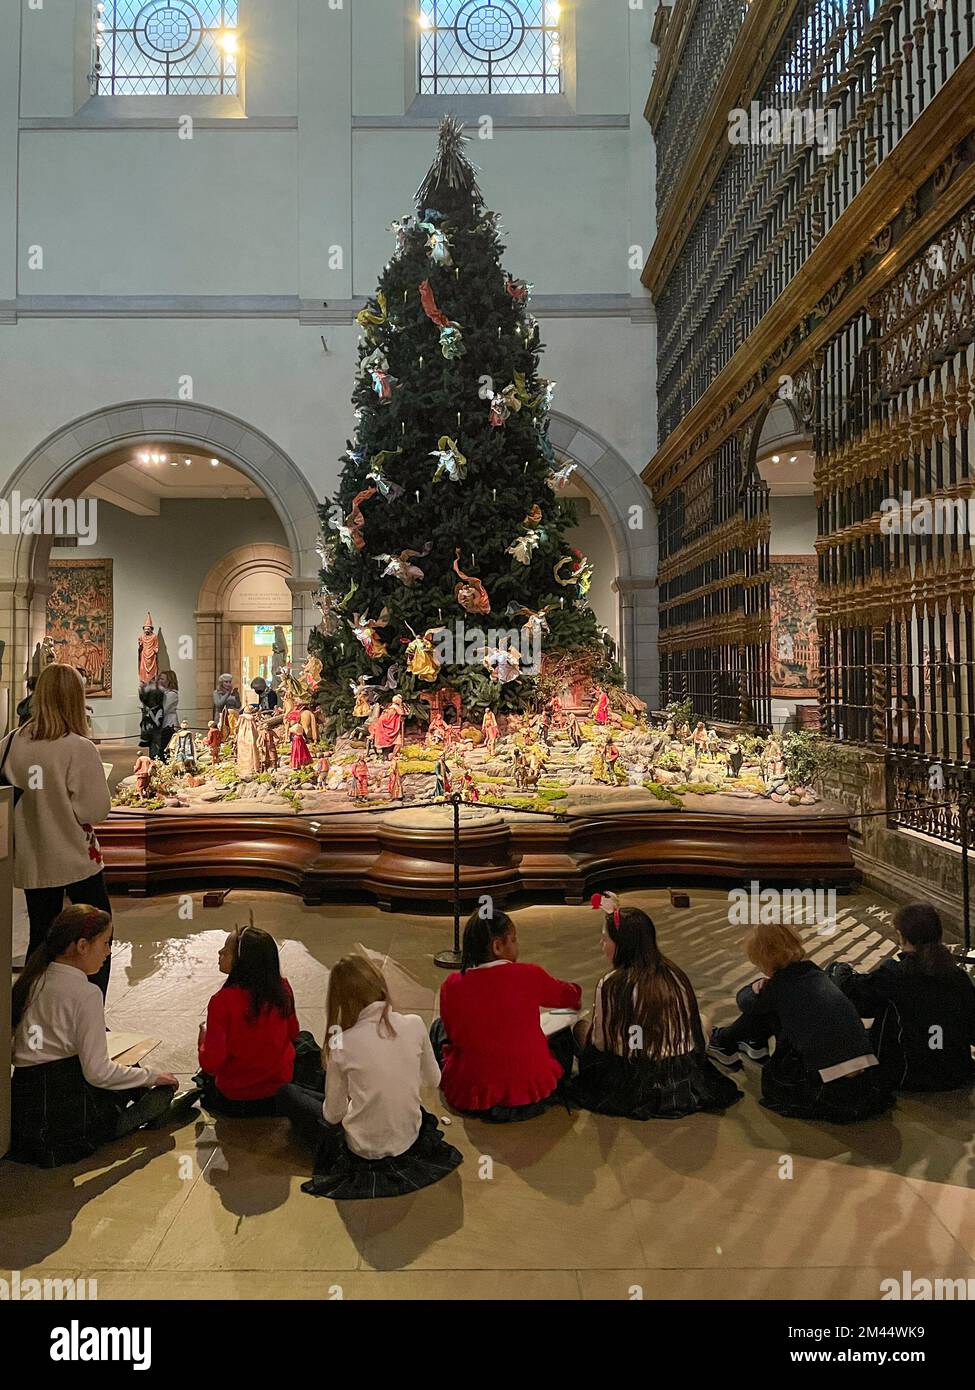 Christmas Tree in the Medieval Sculpture Hall, The Metropolitan Museum of Art, NYC 2022 Stock Photo